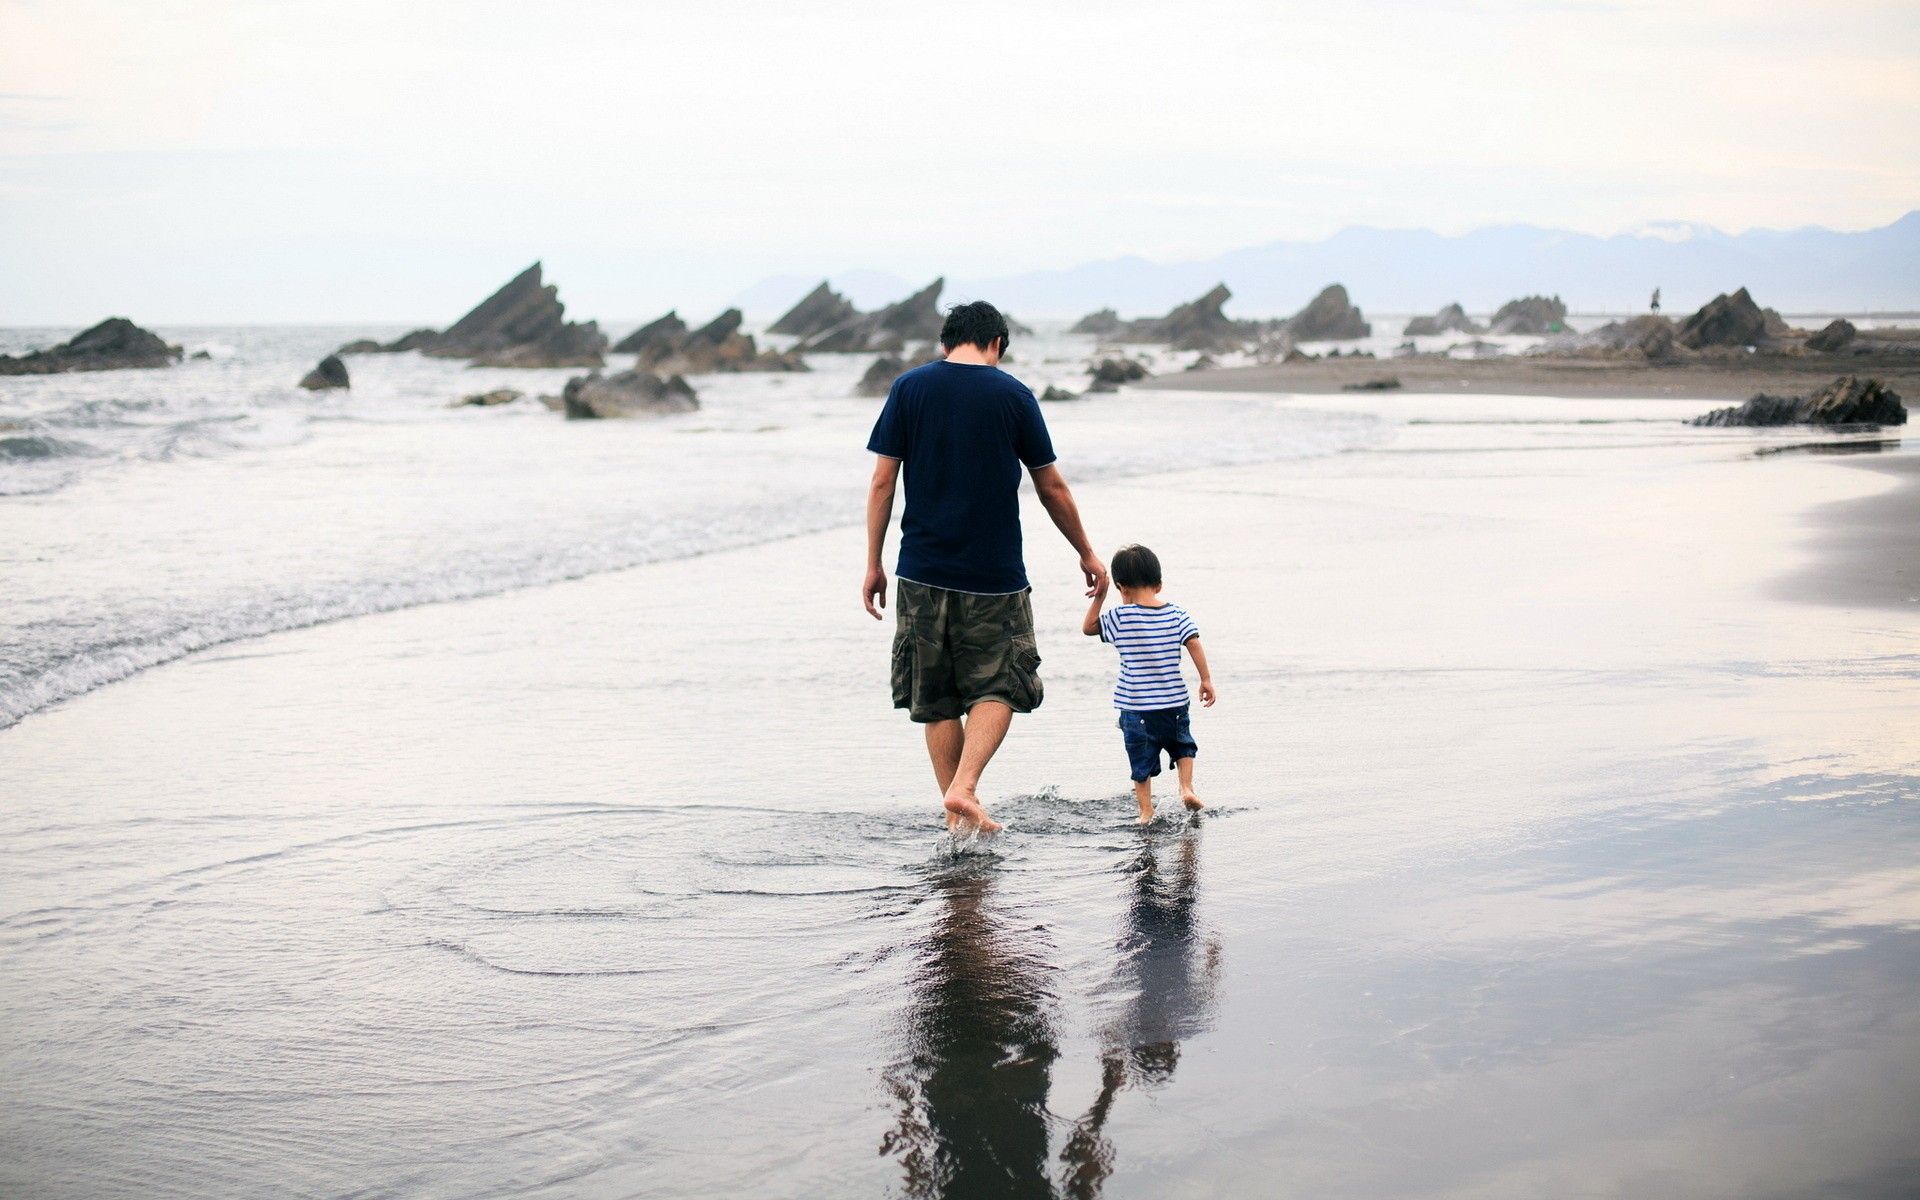 father and son wallpaper,photograph,beach,water,vacation,ocean